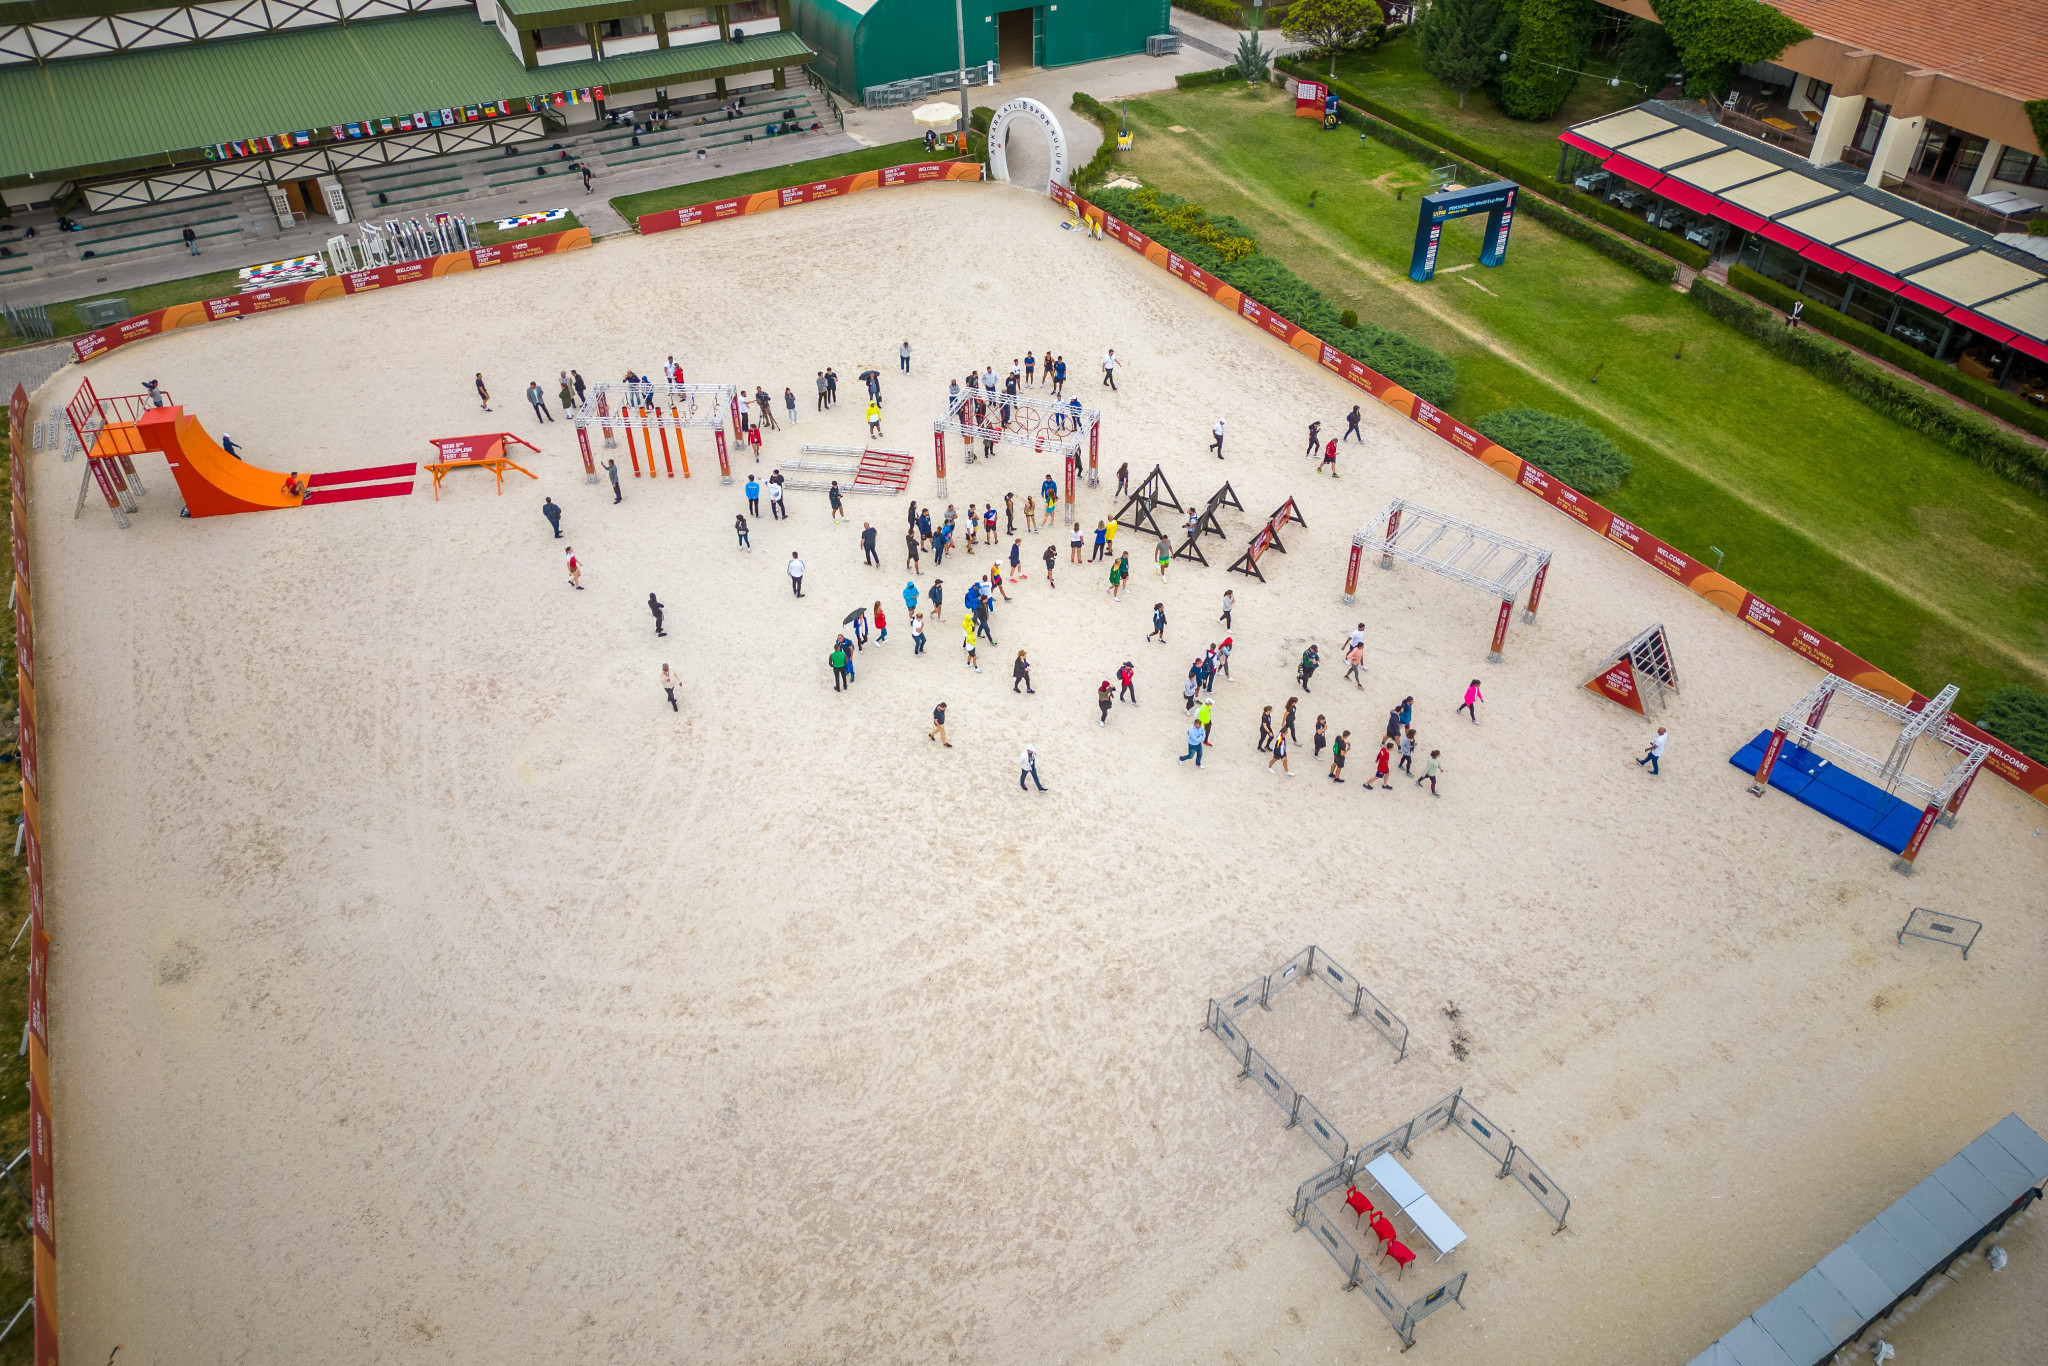 Another obstacle test event is scheduled at the Junior World Championships this week ©UIPM/Augustas Didžgalvis